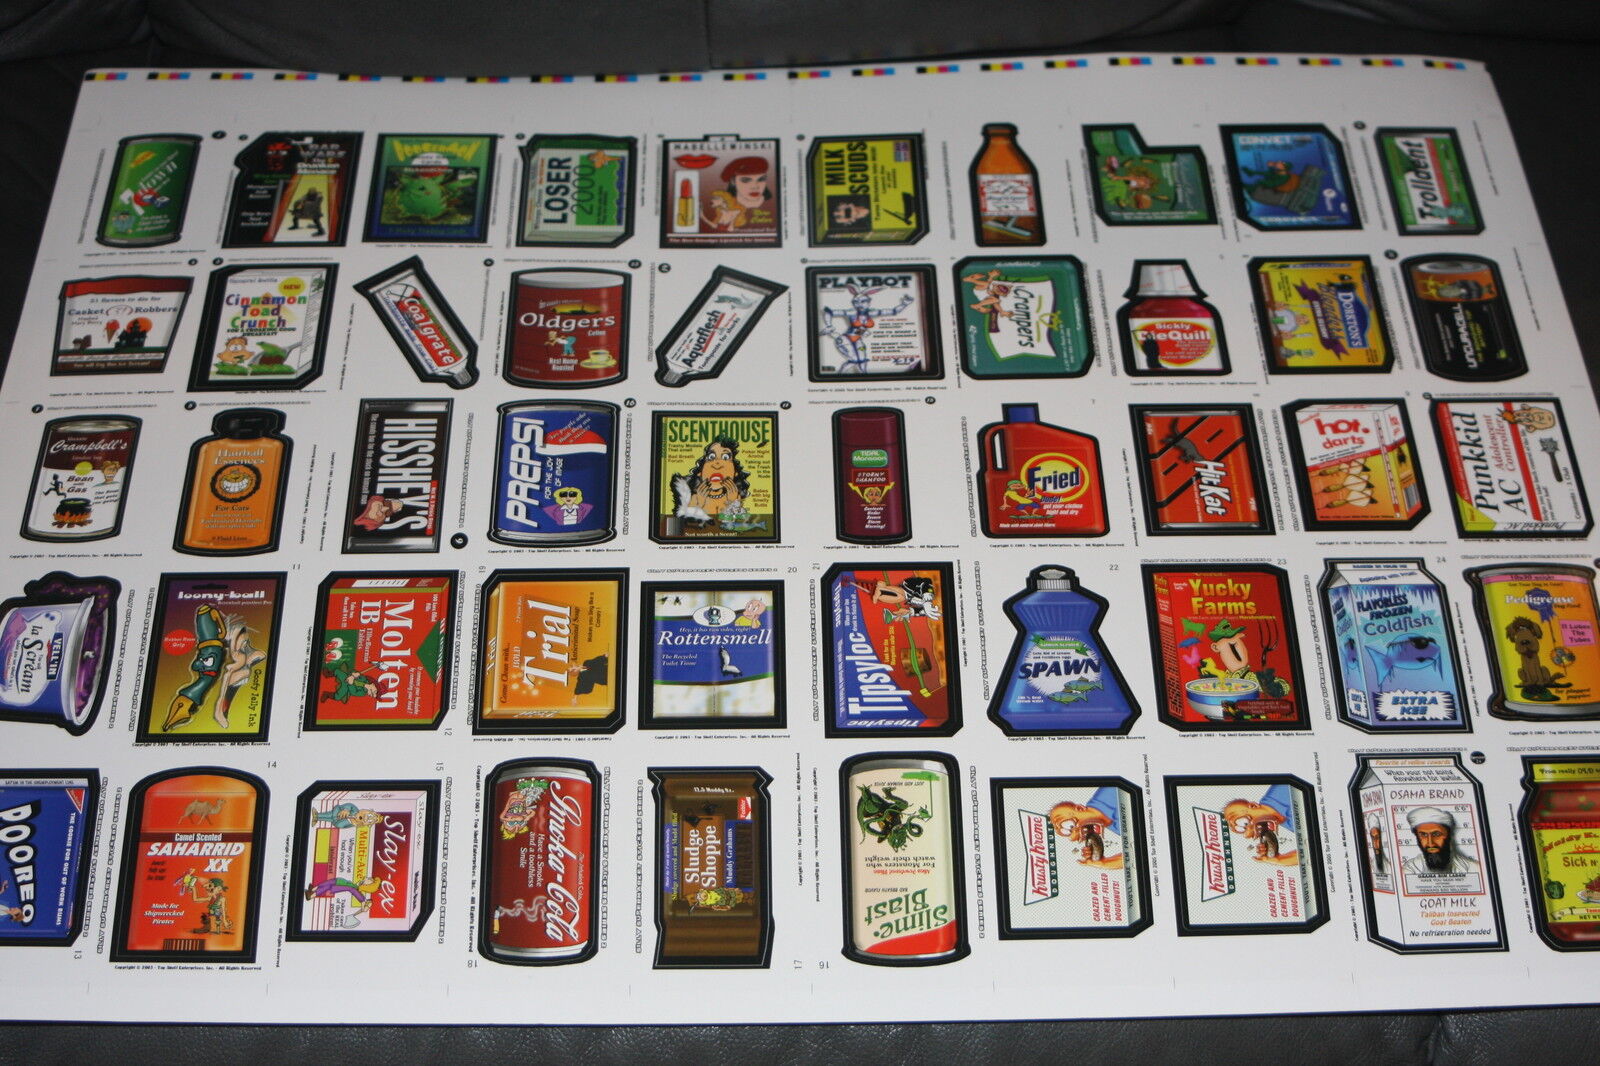 2003 SILLY SUPERMARKET UNCUT SHEET RARE PLAYBOT 1ST PRINT LIKE WACKY PACKAGES